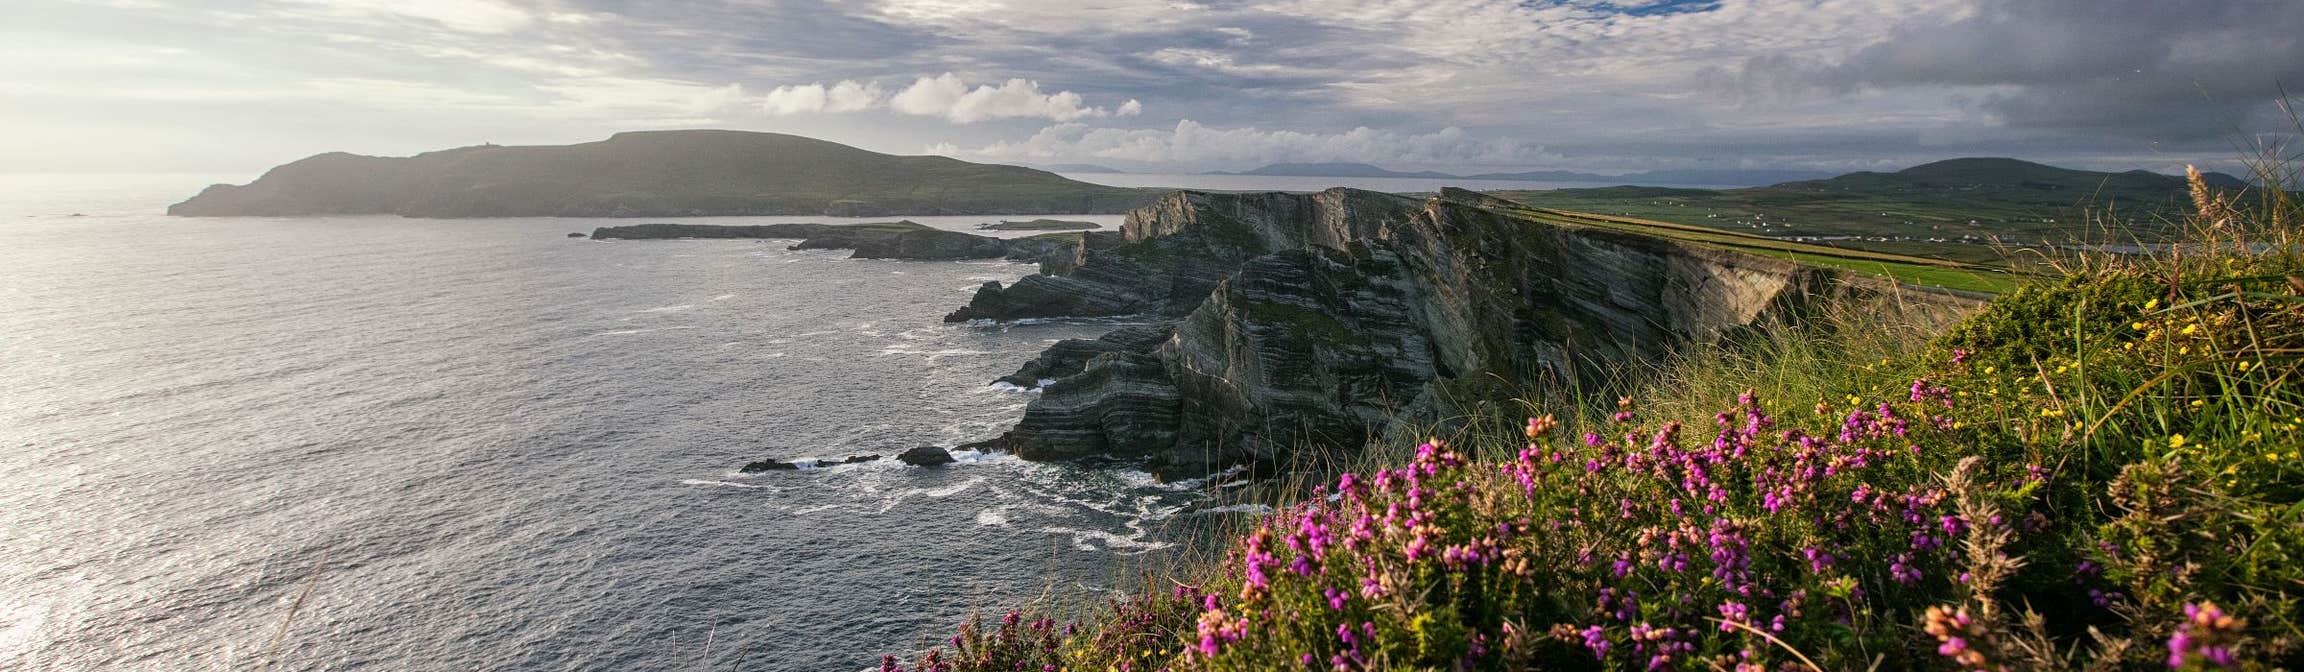 Image of the Kerry Cliffs in County Kerry